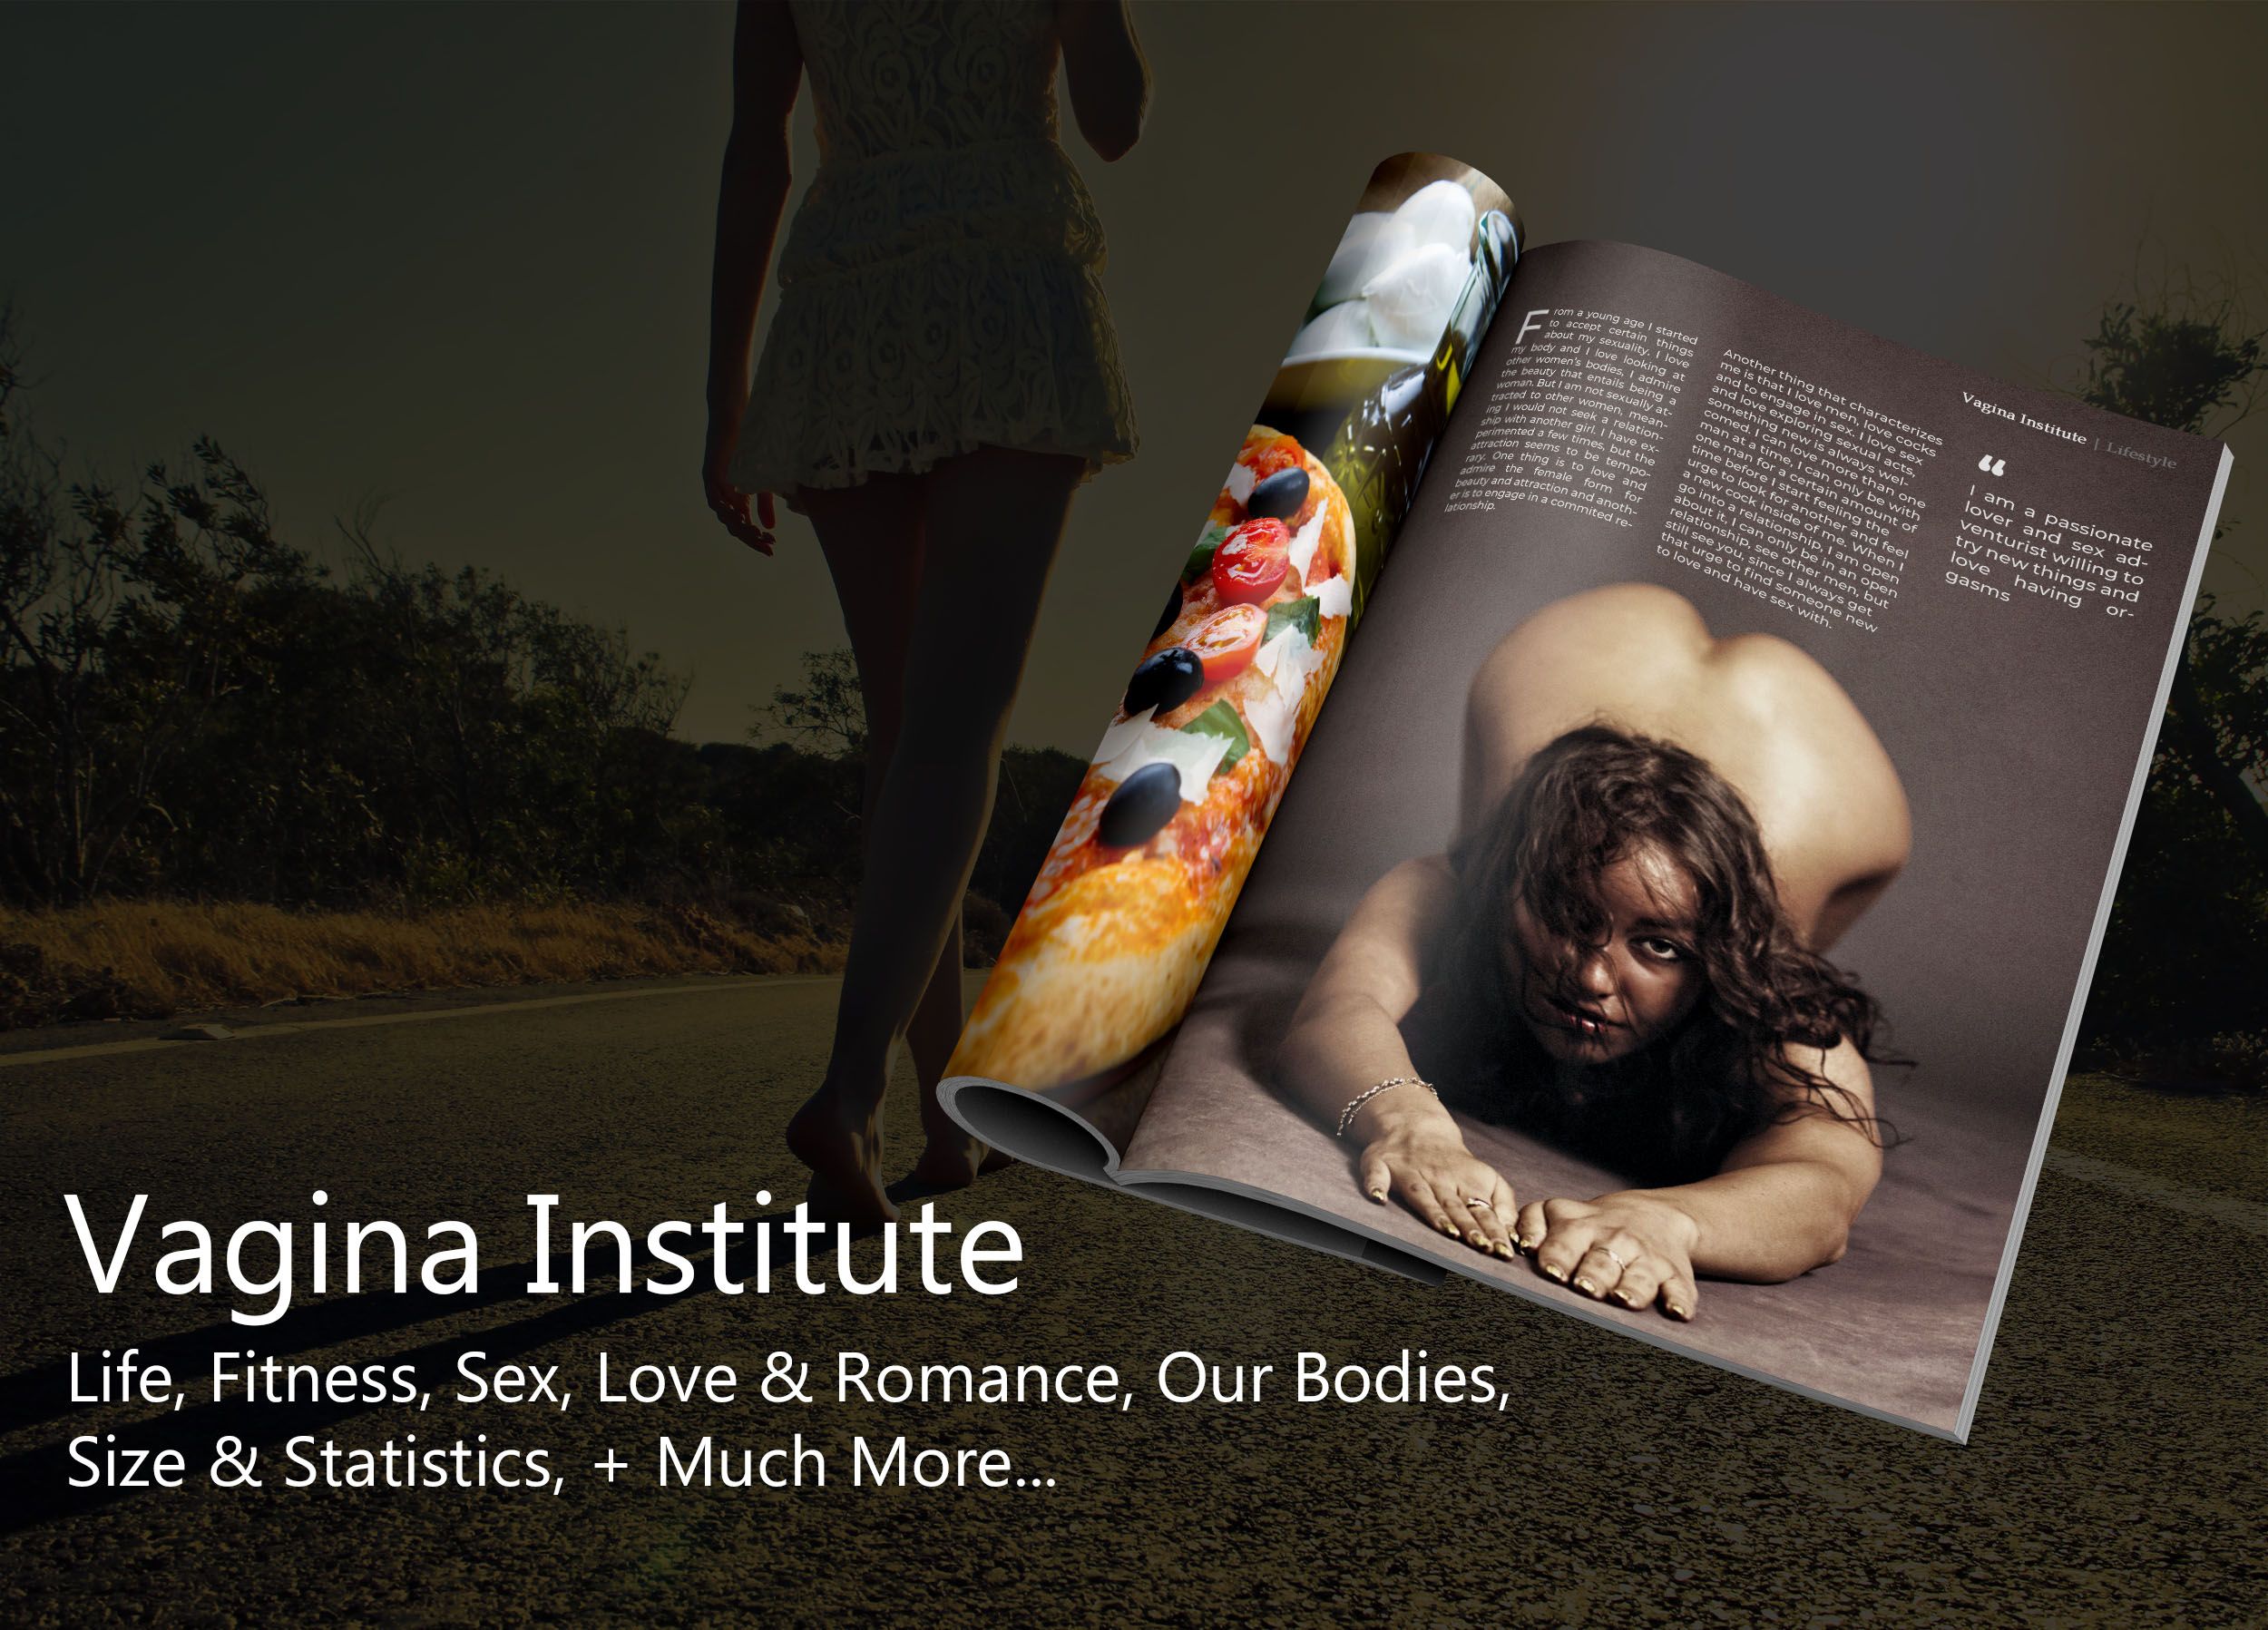 Full page ad of vagina institute magazine, woman walking on street